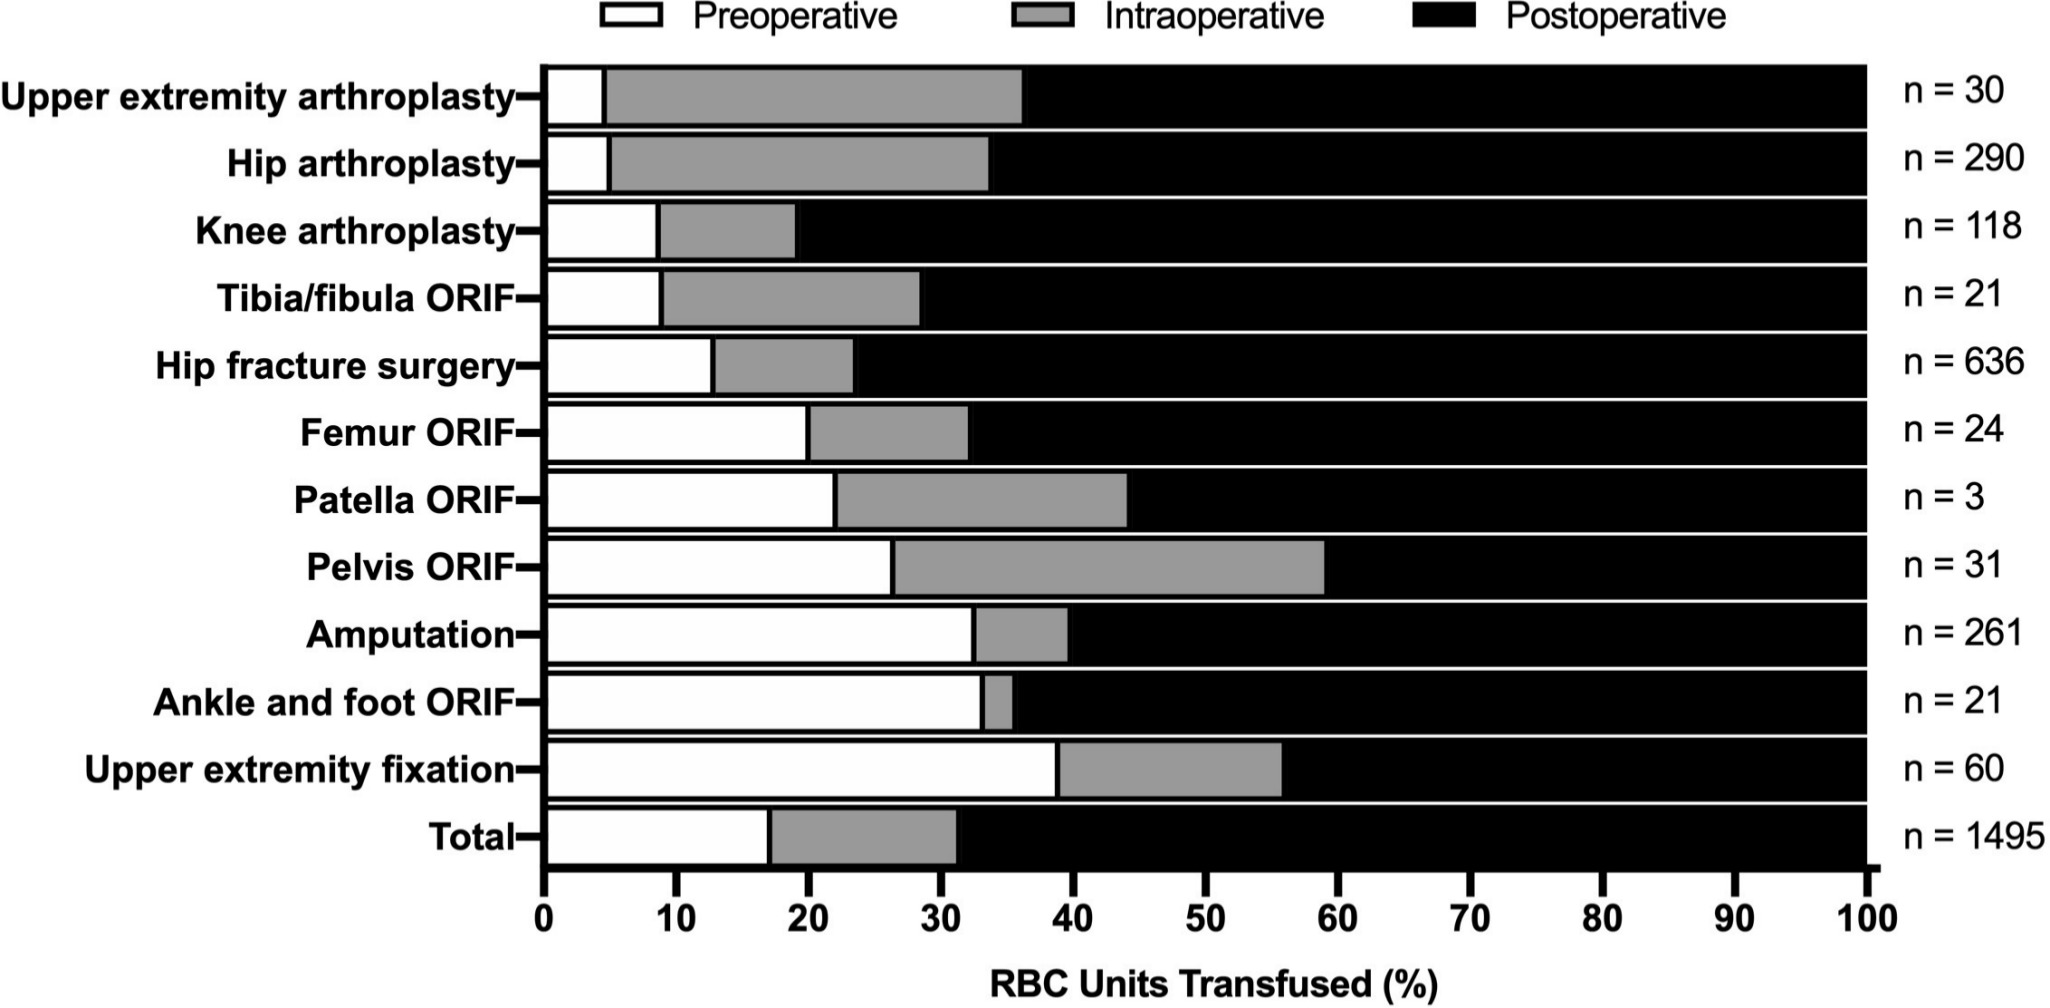 Fig. 3 
            Timing of red blood cell (RBC) transfusion in relation to the surgery. RBC transfusions in patients undergoing orthopaedic surgeries were classified based on their timing relative to the surgery: preoperative (white), intraoperative (grey), and postoperative (black). Numbers to the right of the figure are the number of surgeries each row represents. ORIF, open reduction and internal fixation.
          